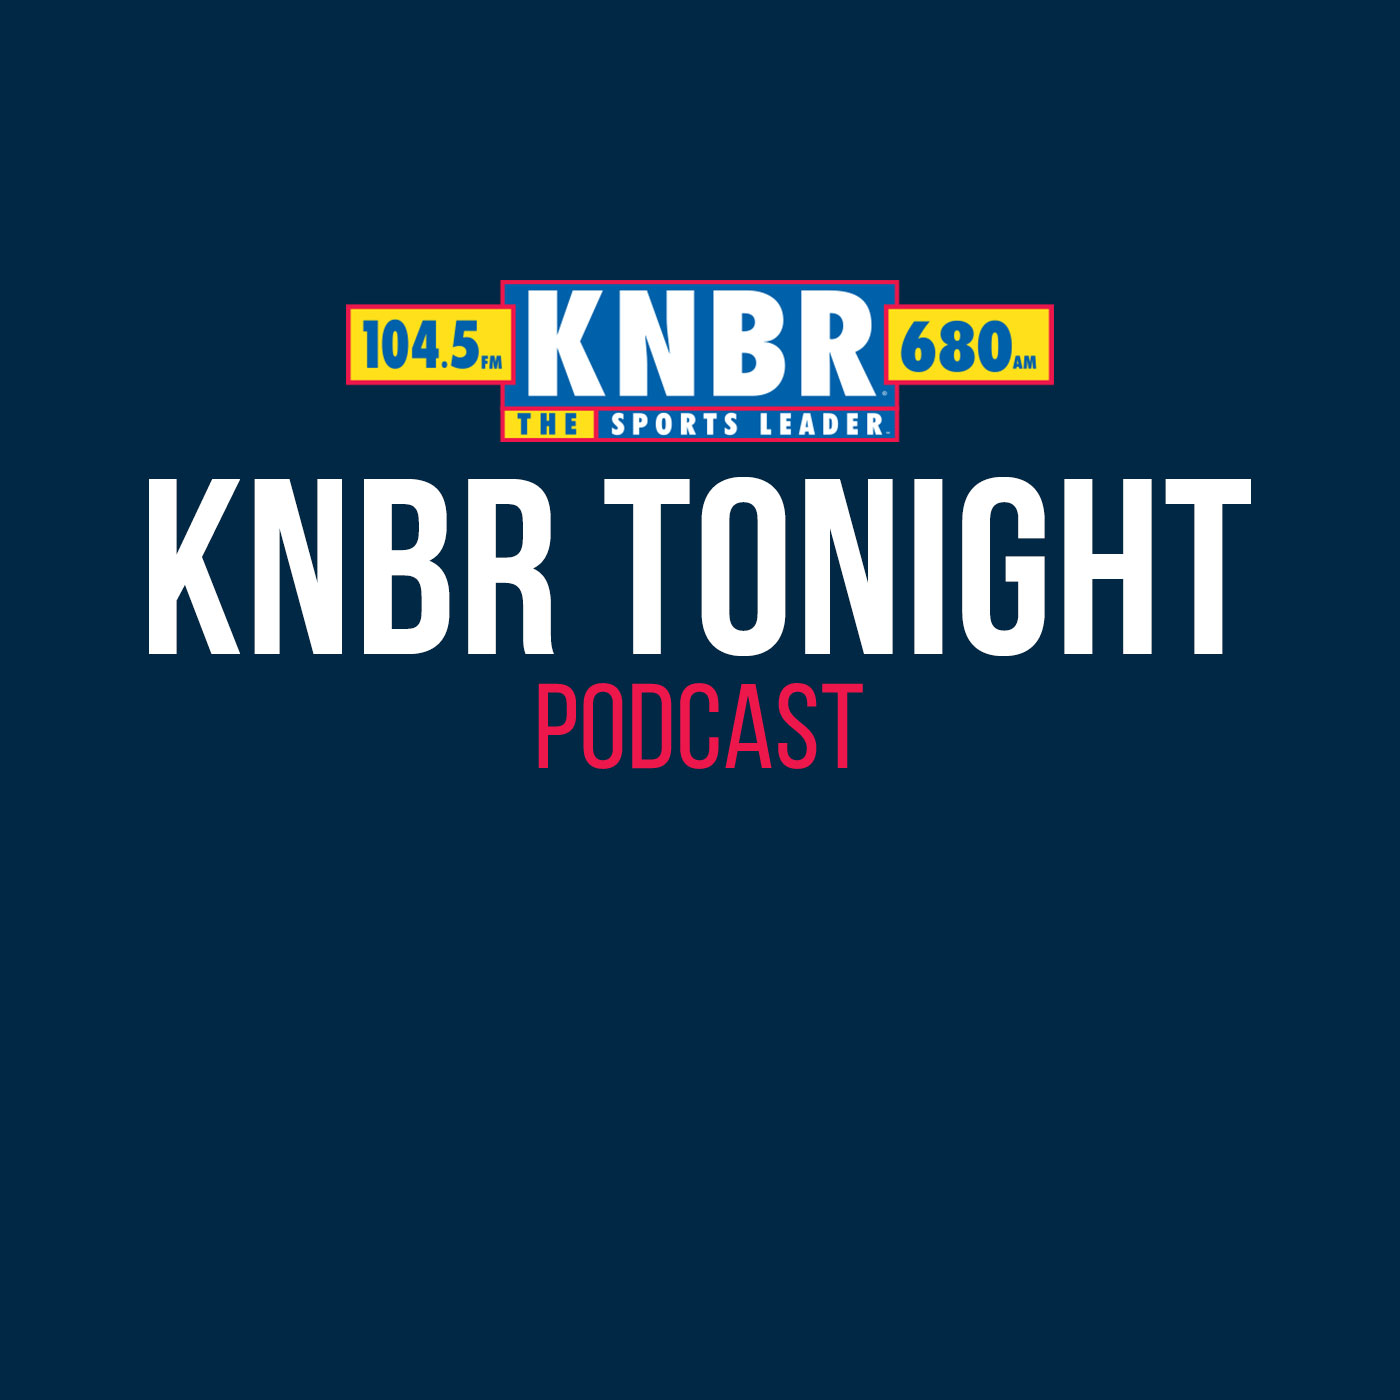 1-28 Doc Holliday joins KNBR Tonight with Dieter to previews what to watch for when the San Francisco 49ers face the Los Angeles Rams in Sunday's NFC Championship